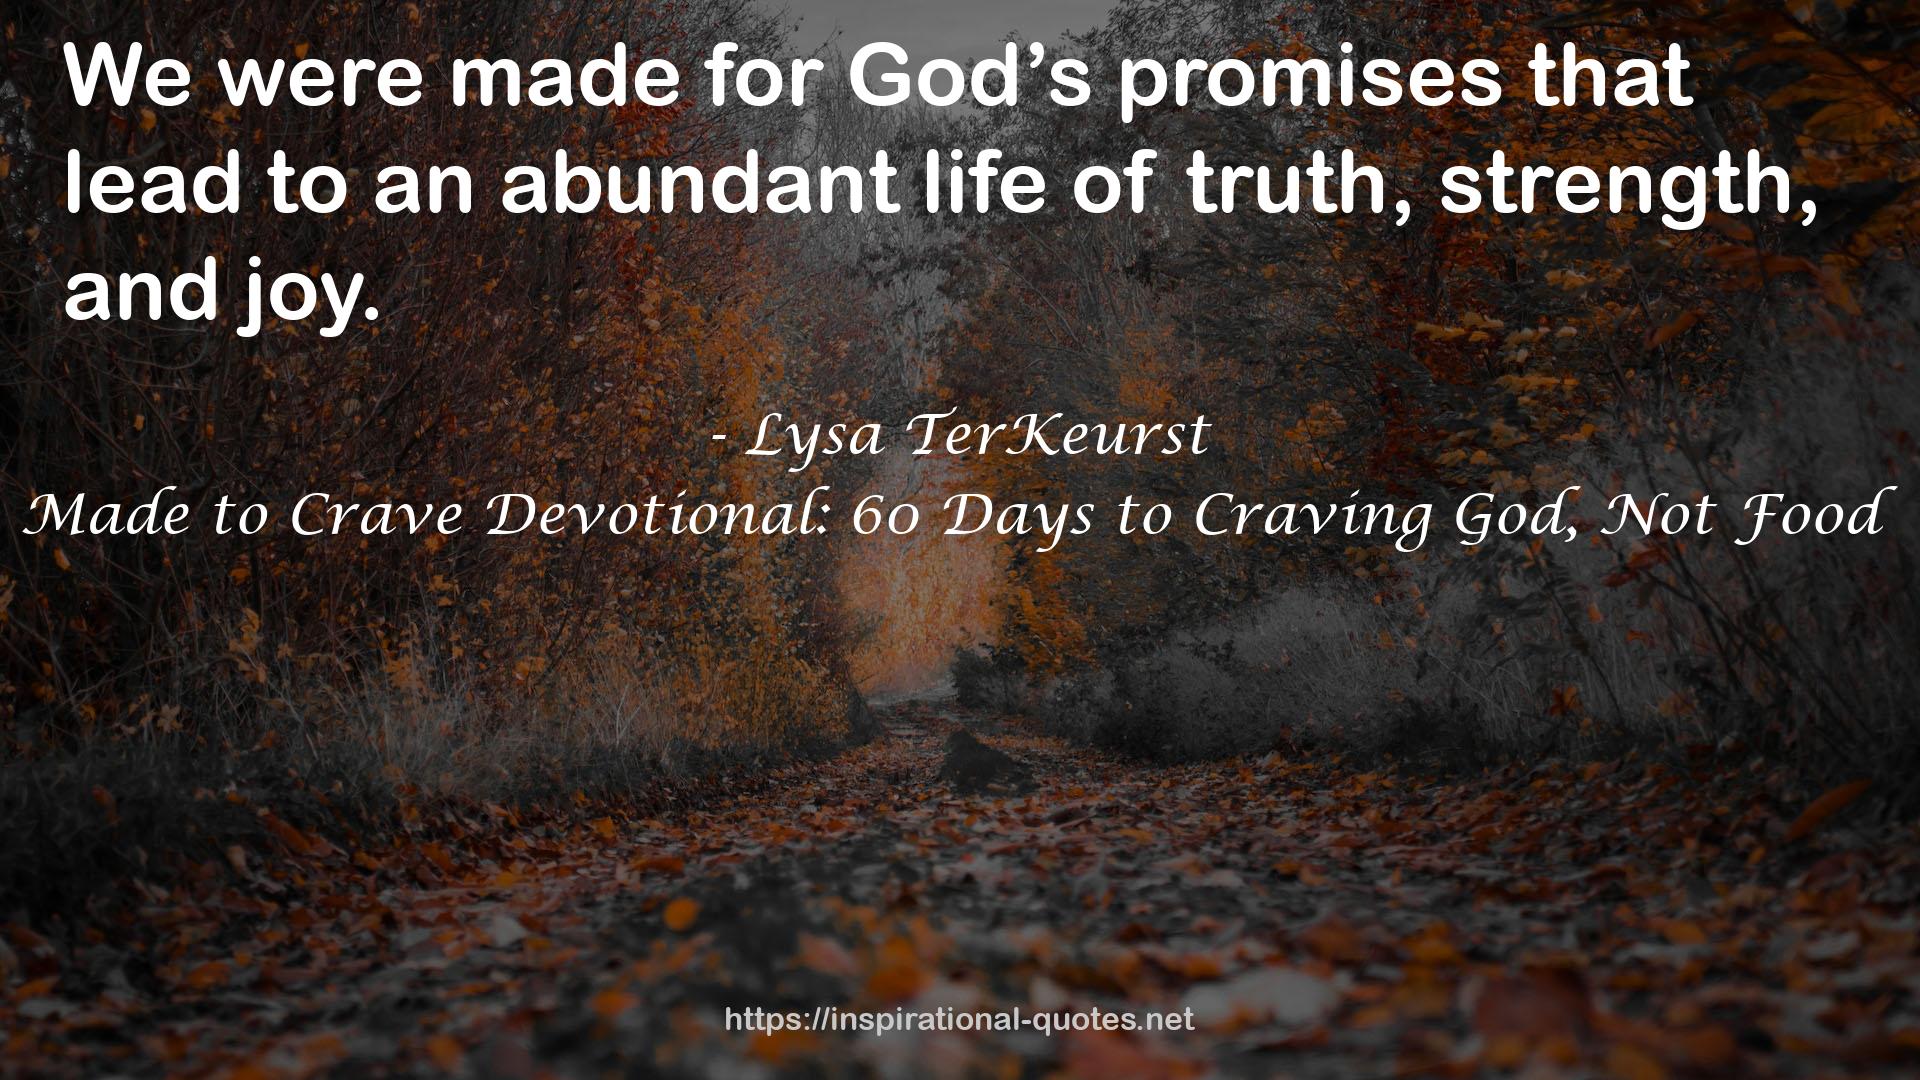 Made to Crave Devotional: 60 Days to Craving God, Not Food QUOTES